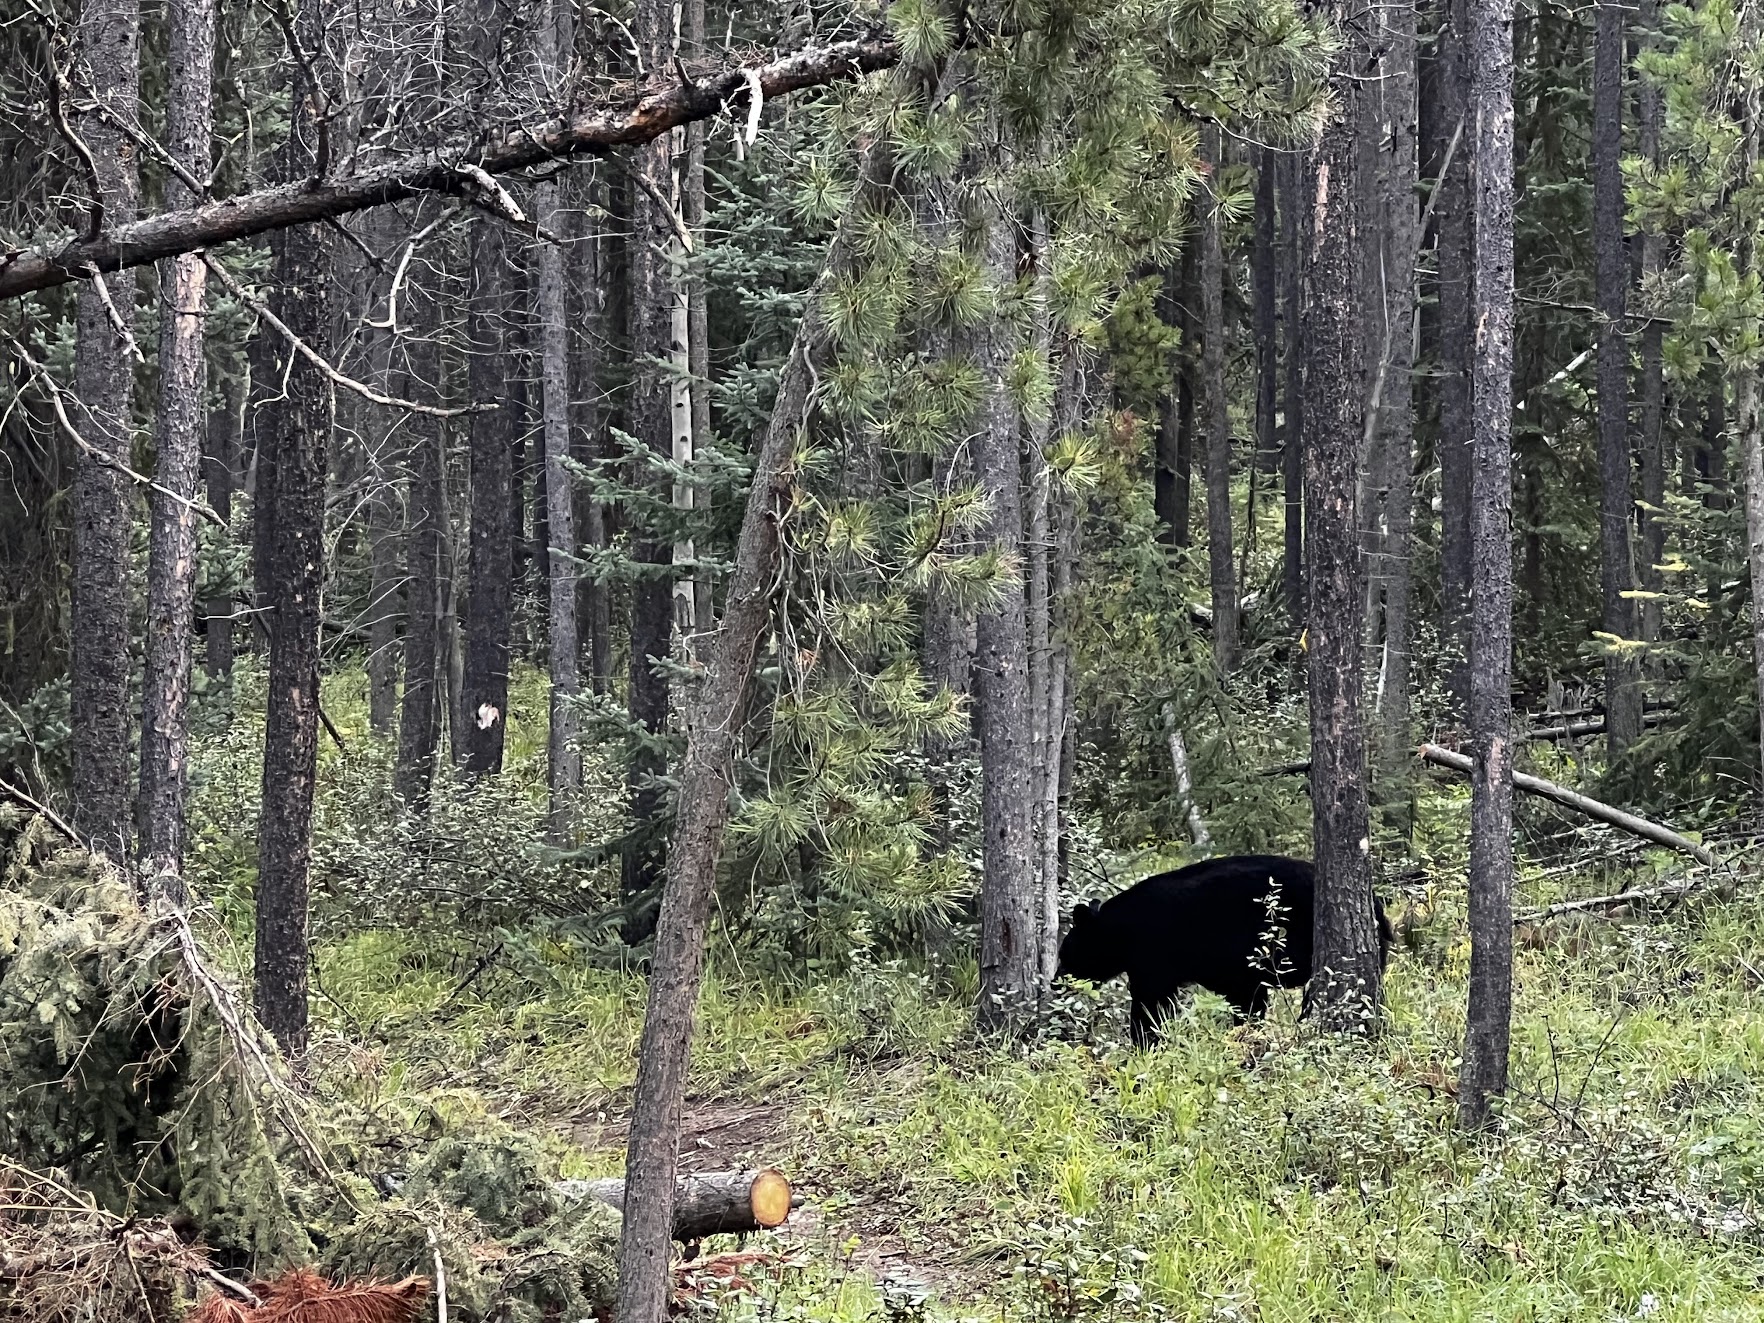 Black bear in a forest